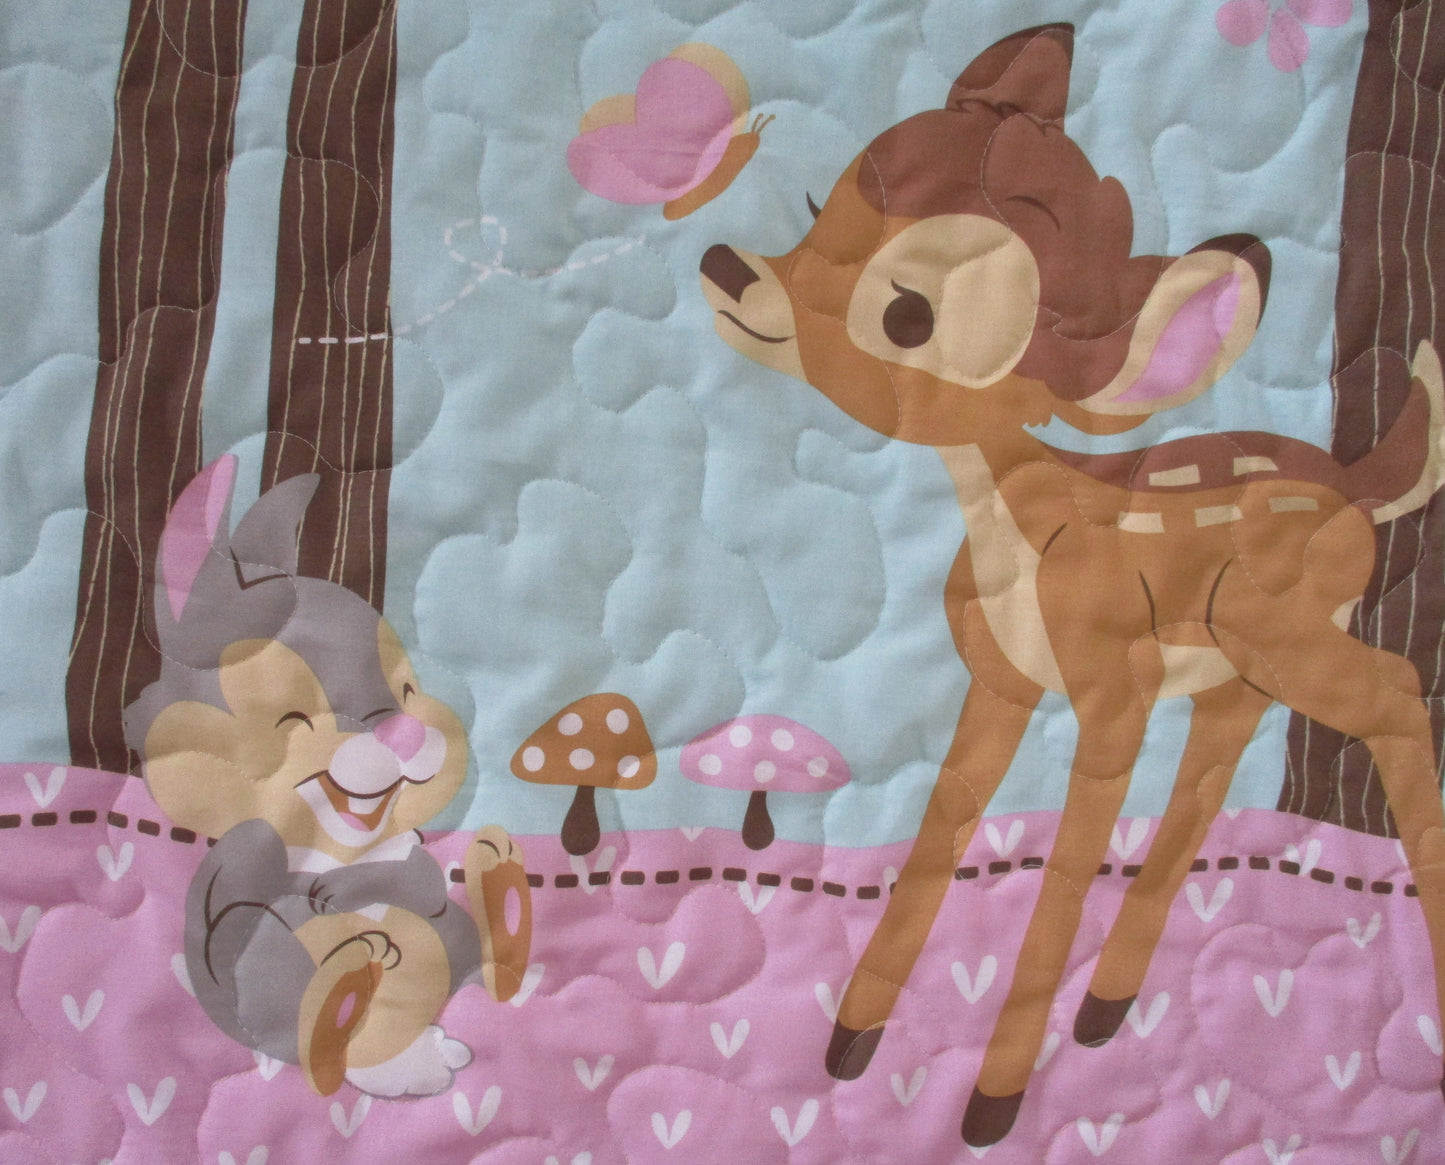 BAMBI THUMPER & FLOWER Inspired Quilted Blanket FOREST DREAMS